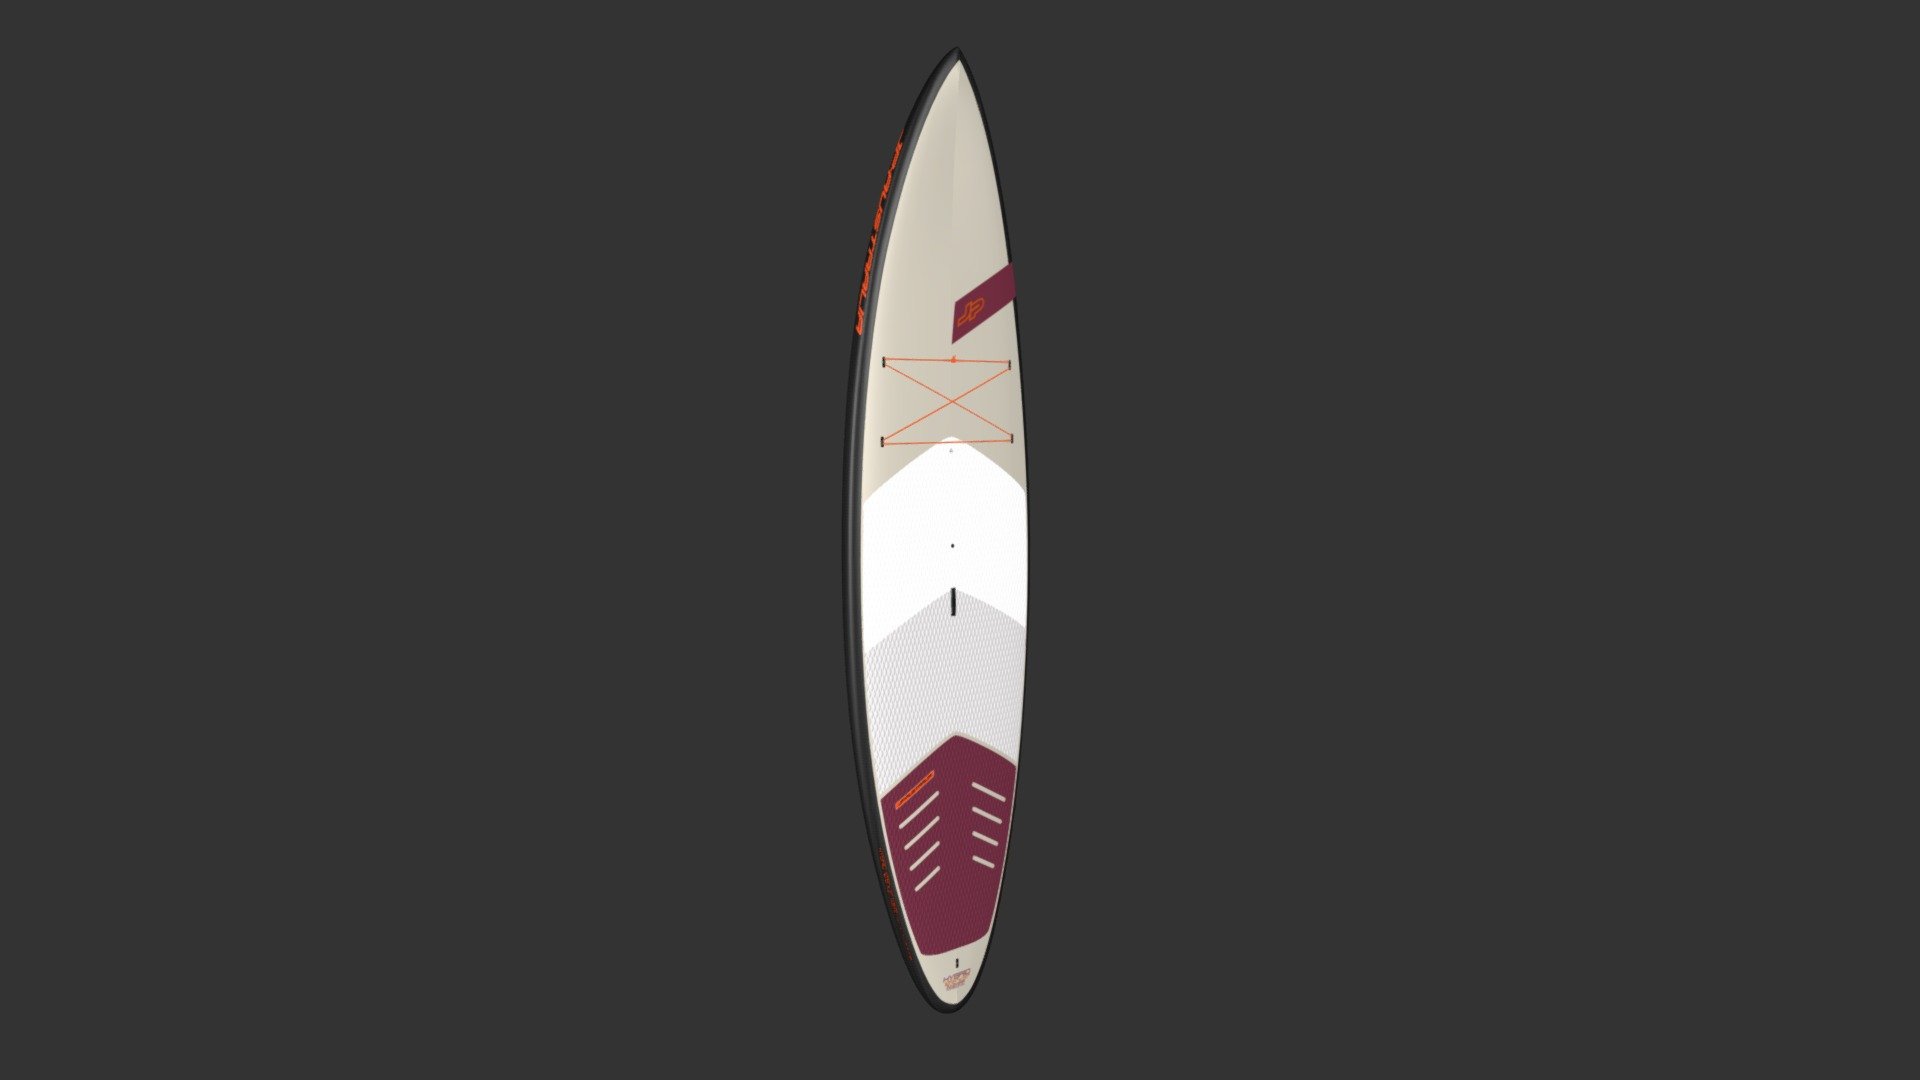 The subtle displacement bow flowing into a double concave bottom with soft thin rails and narrow tail provide a combination of good glide, stability and solid surfing characteristic. The Hybrids feature a long efficient water line offering a superior paddling sensation on flat water with the longboard type of tail for easy rail to rail transfers in the surf.

Take the Hybrid for a tour or a downwind run and check out the waves on your way back. Bring along your necessities under the bungee tie downs for a great day on the water 3d model